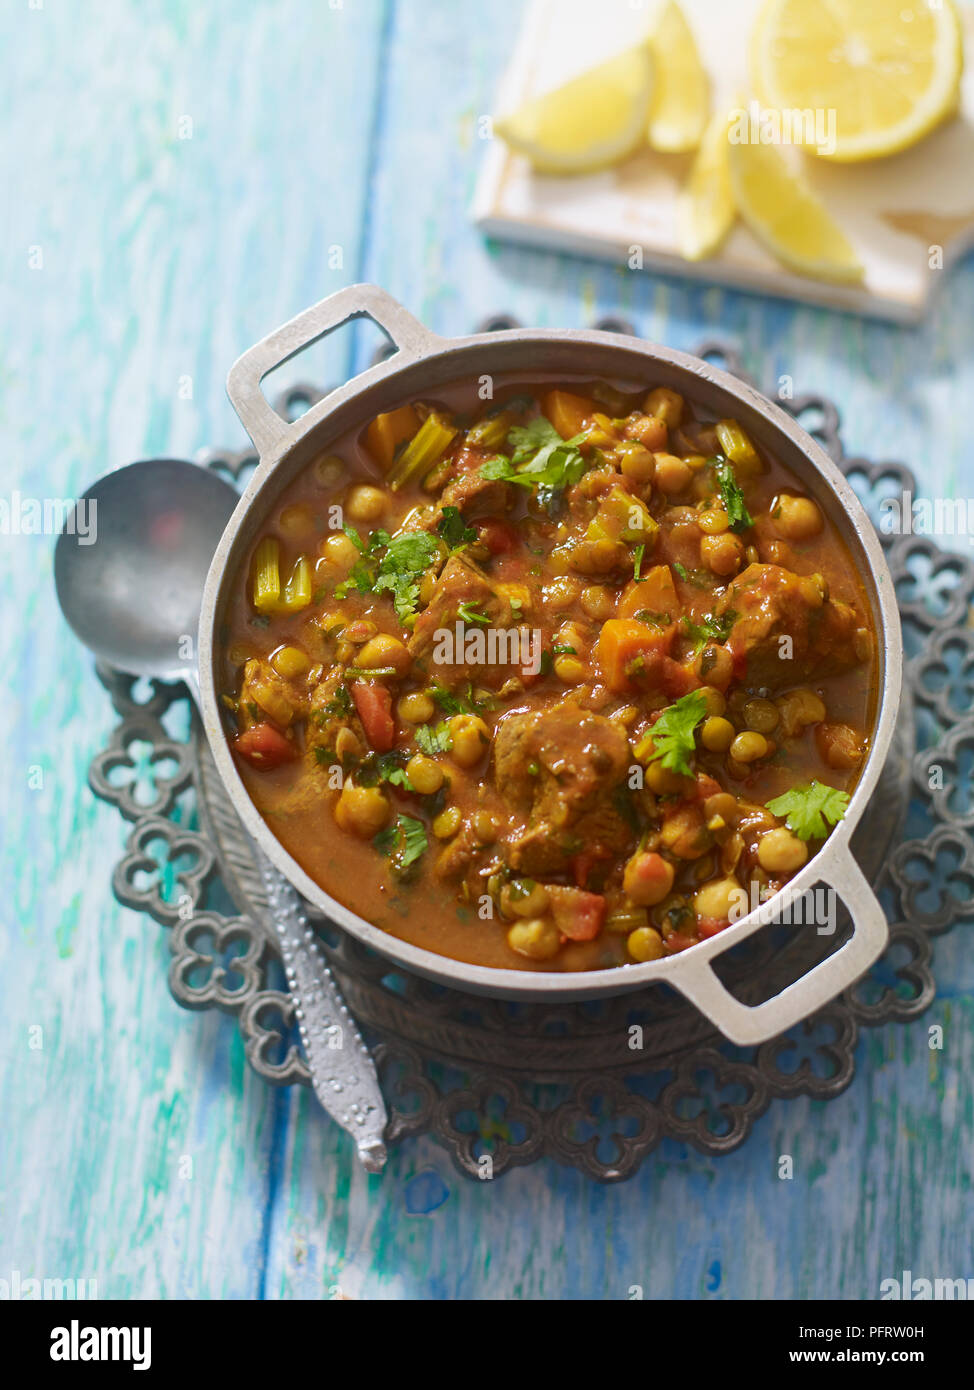 Harira, North African lamb, chickpea and lentil stew Stock Photo